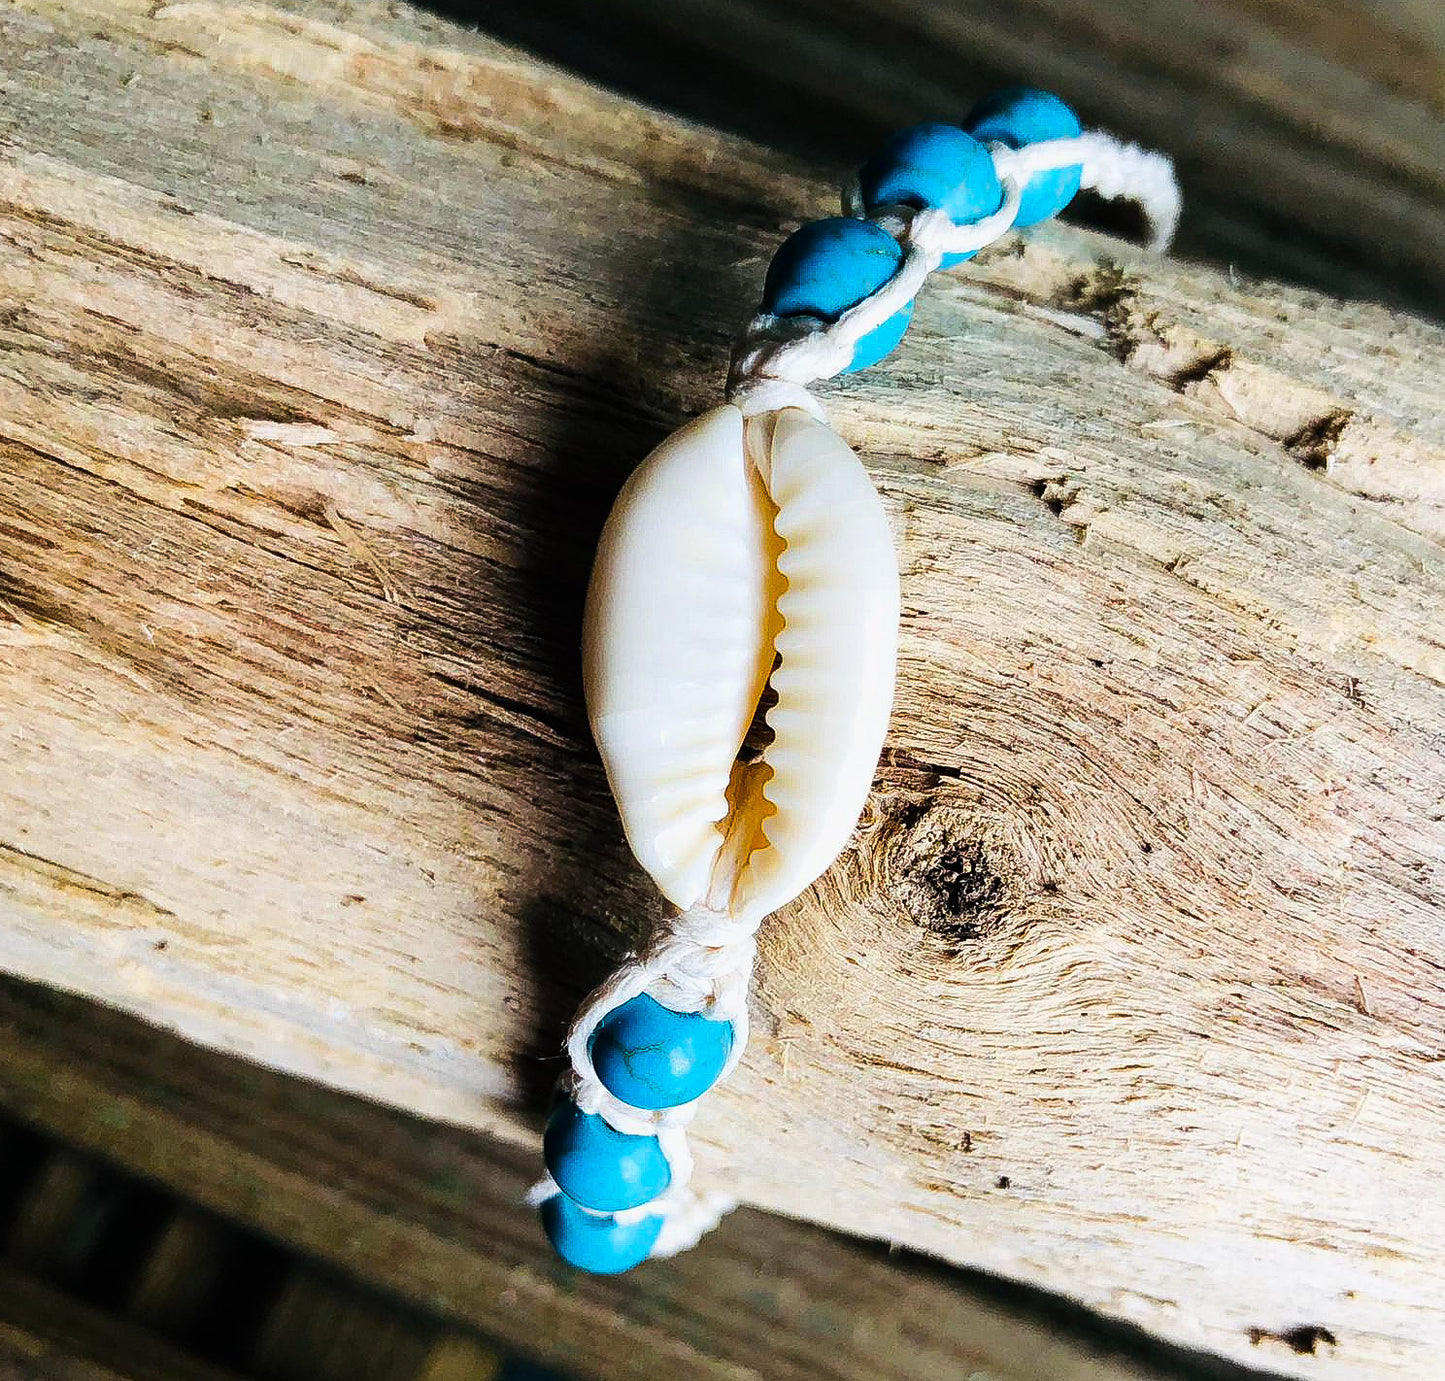 Bracelet with Cowrie shell pendant and blue beads